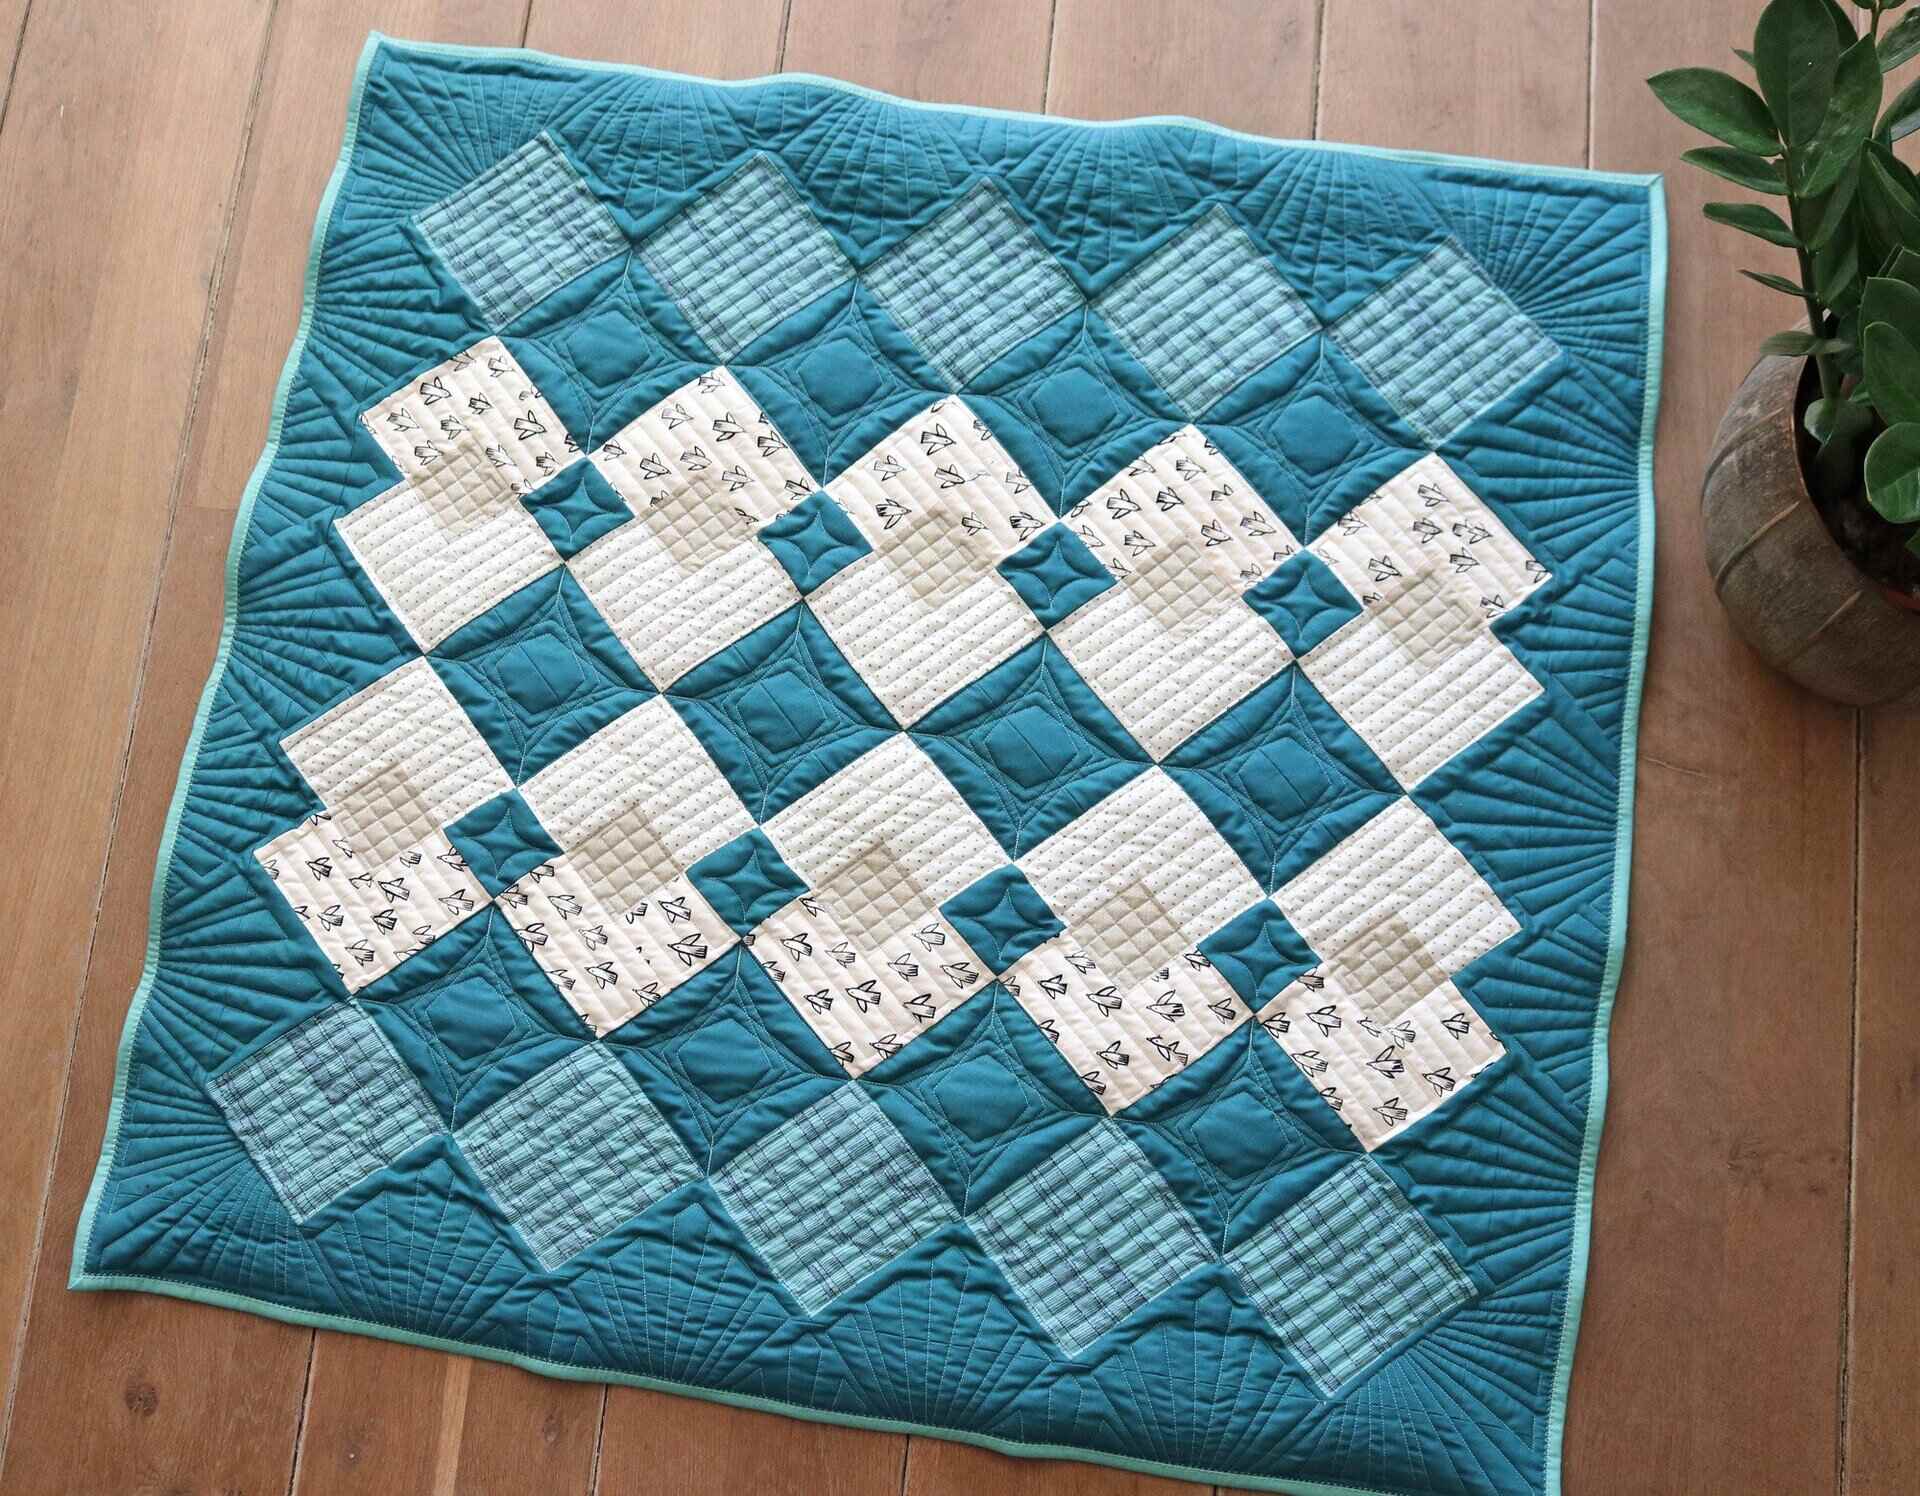 New Arrival: Discover The Beauty Of Transparency Quilts